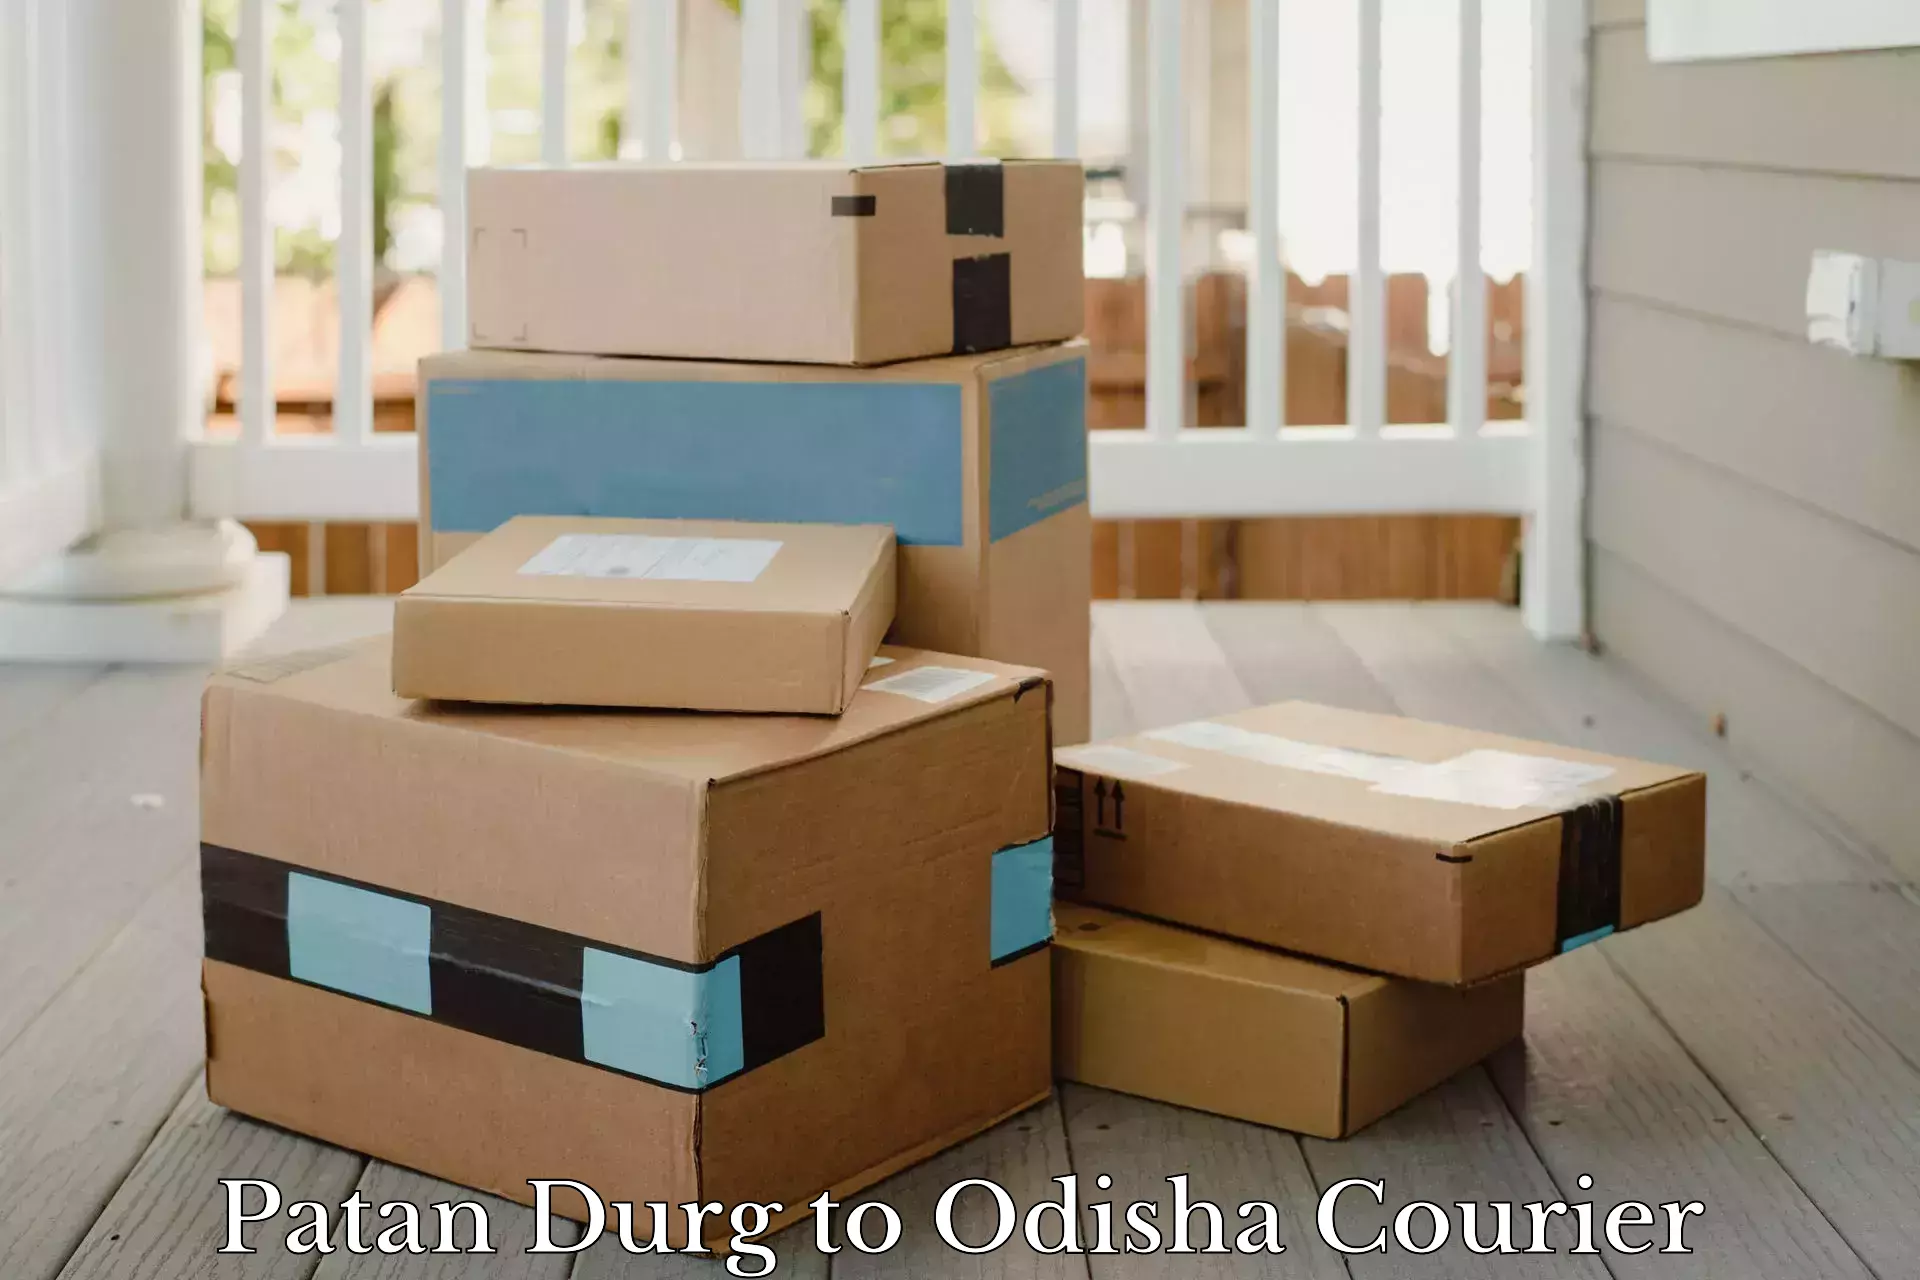 Global shipping solutions Patan Durg to Behrampur